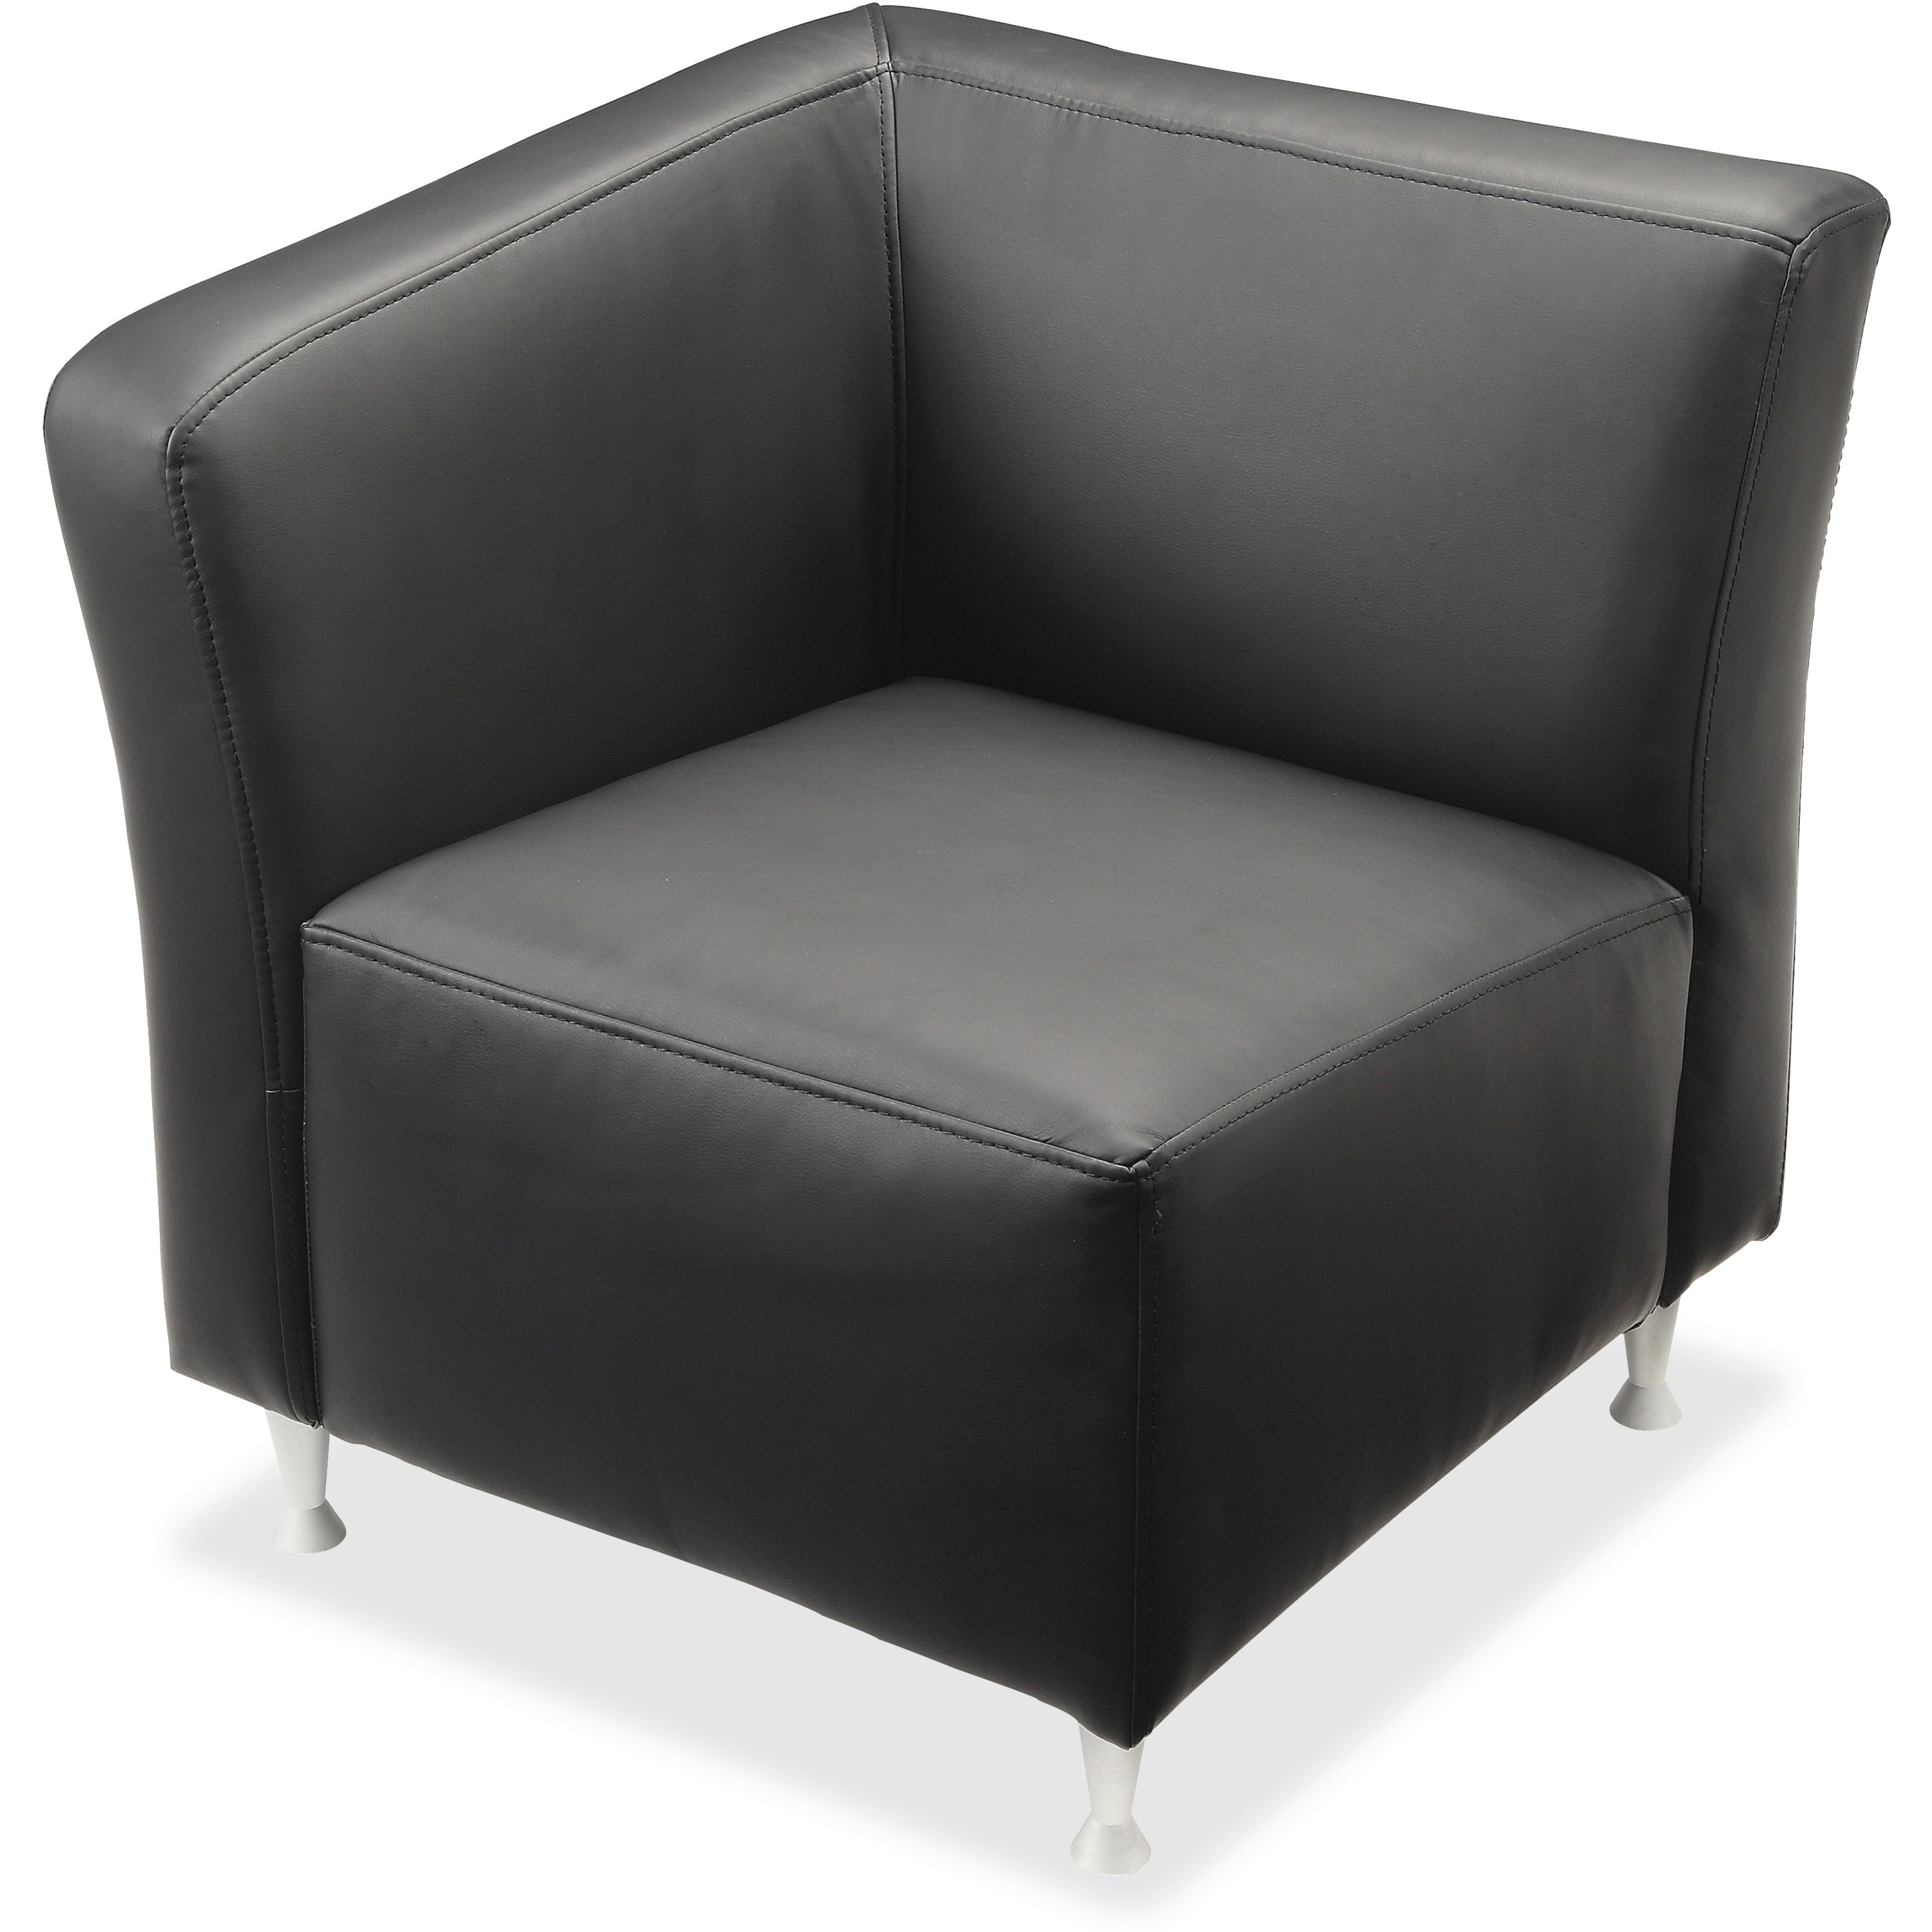 Kamloops Office Systems :: Furniture :: Chairs, Chair Mats & Accessories ::  Chairs :: Reception, Side & Guest Chairs :: Lorell Fuze Modular Series  Right Lounge Chair - Black Leather Seat - Black Leather Back - High Back -  1 Each